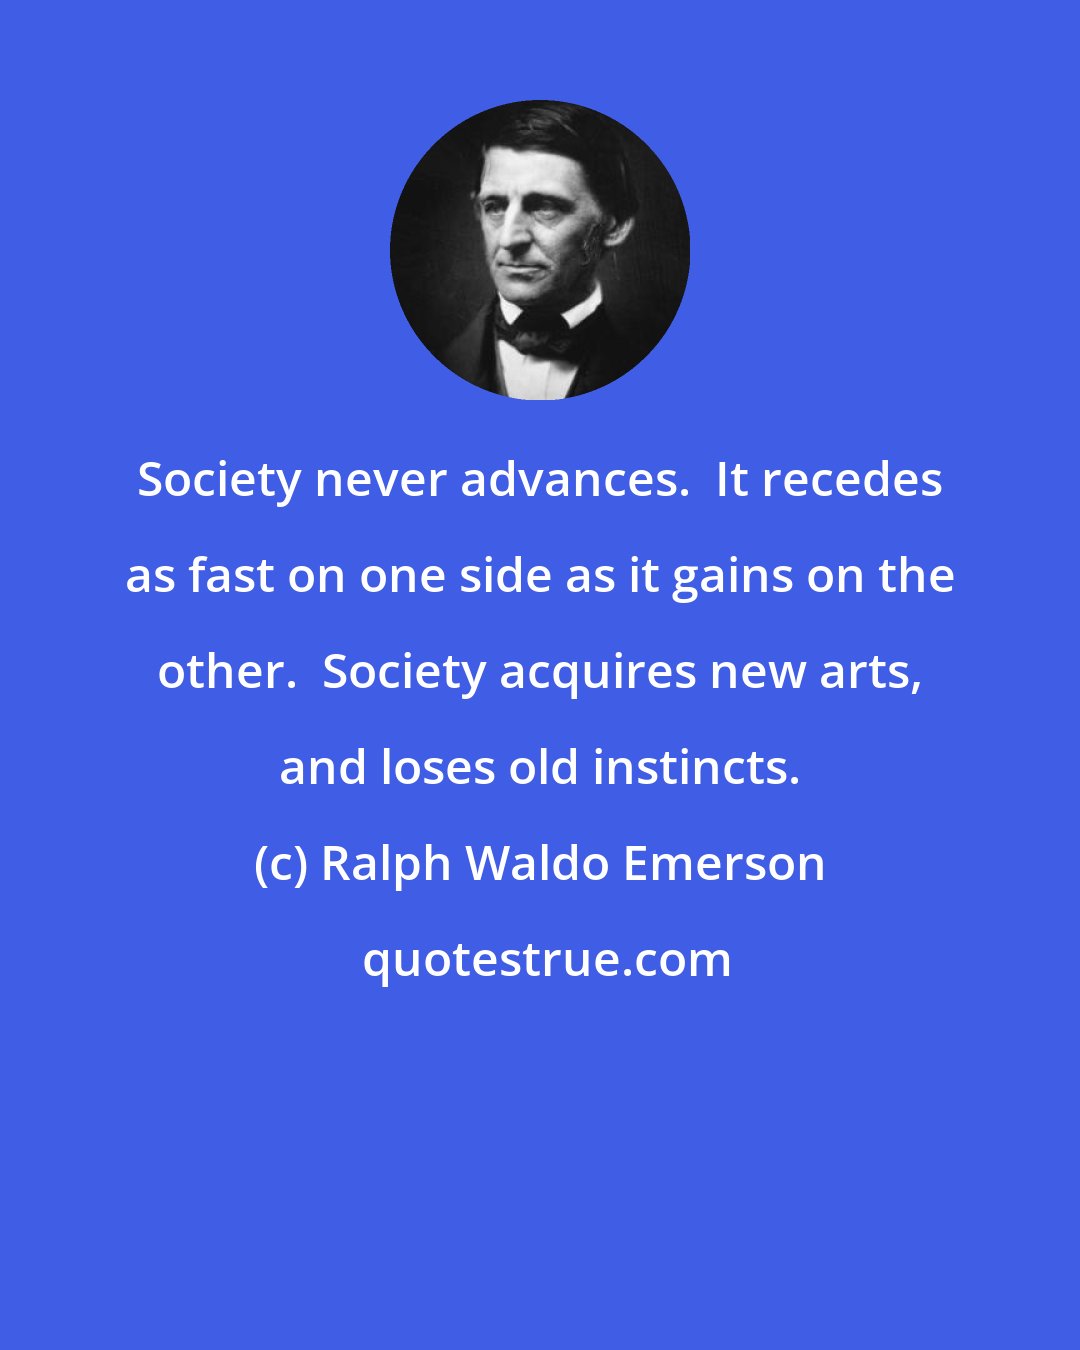 Ralph Waldo Emerson: Society never advances.  It recedes as fast on one side as it gains on the other.  Society acquires new arts, and loses old instincts.